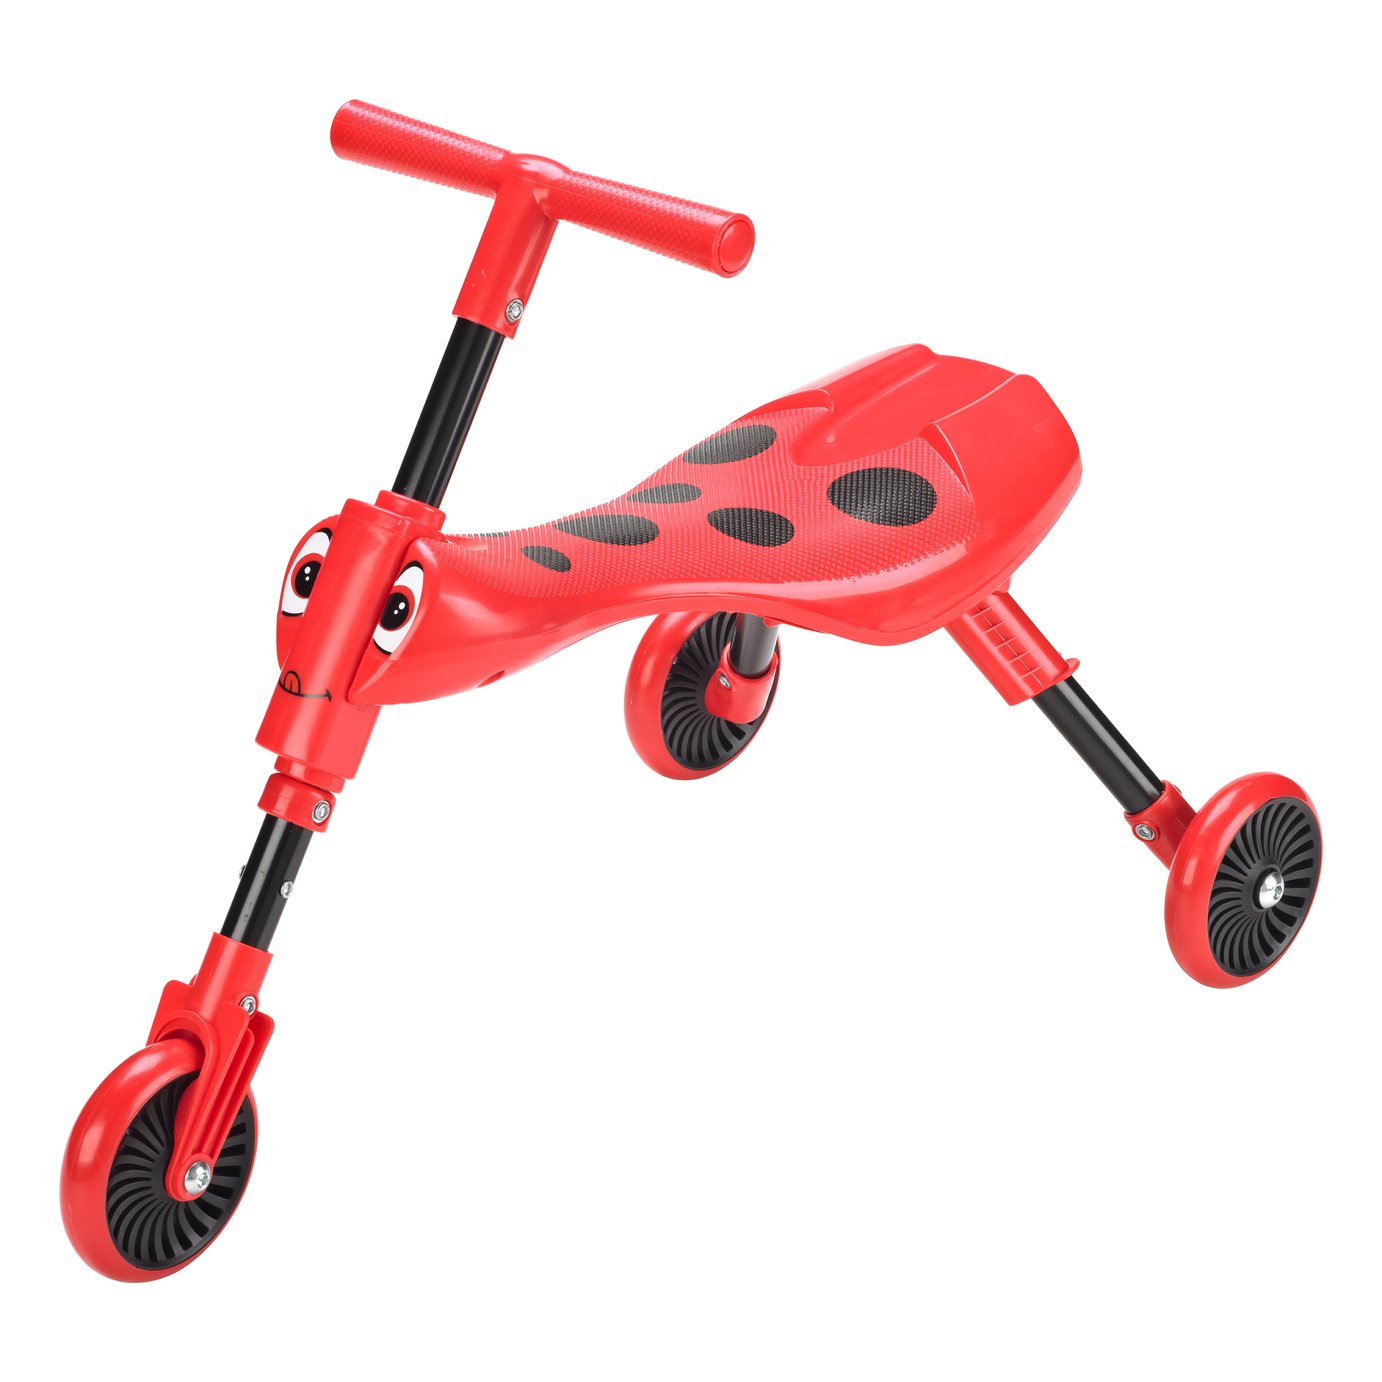 Scuttlebug Ladybird Ride On - Red and Black